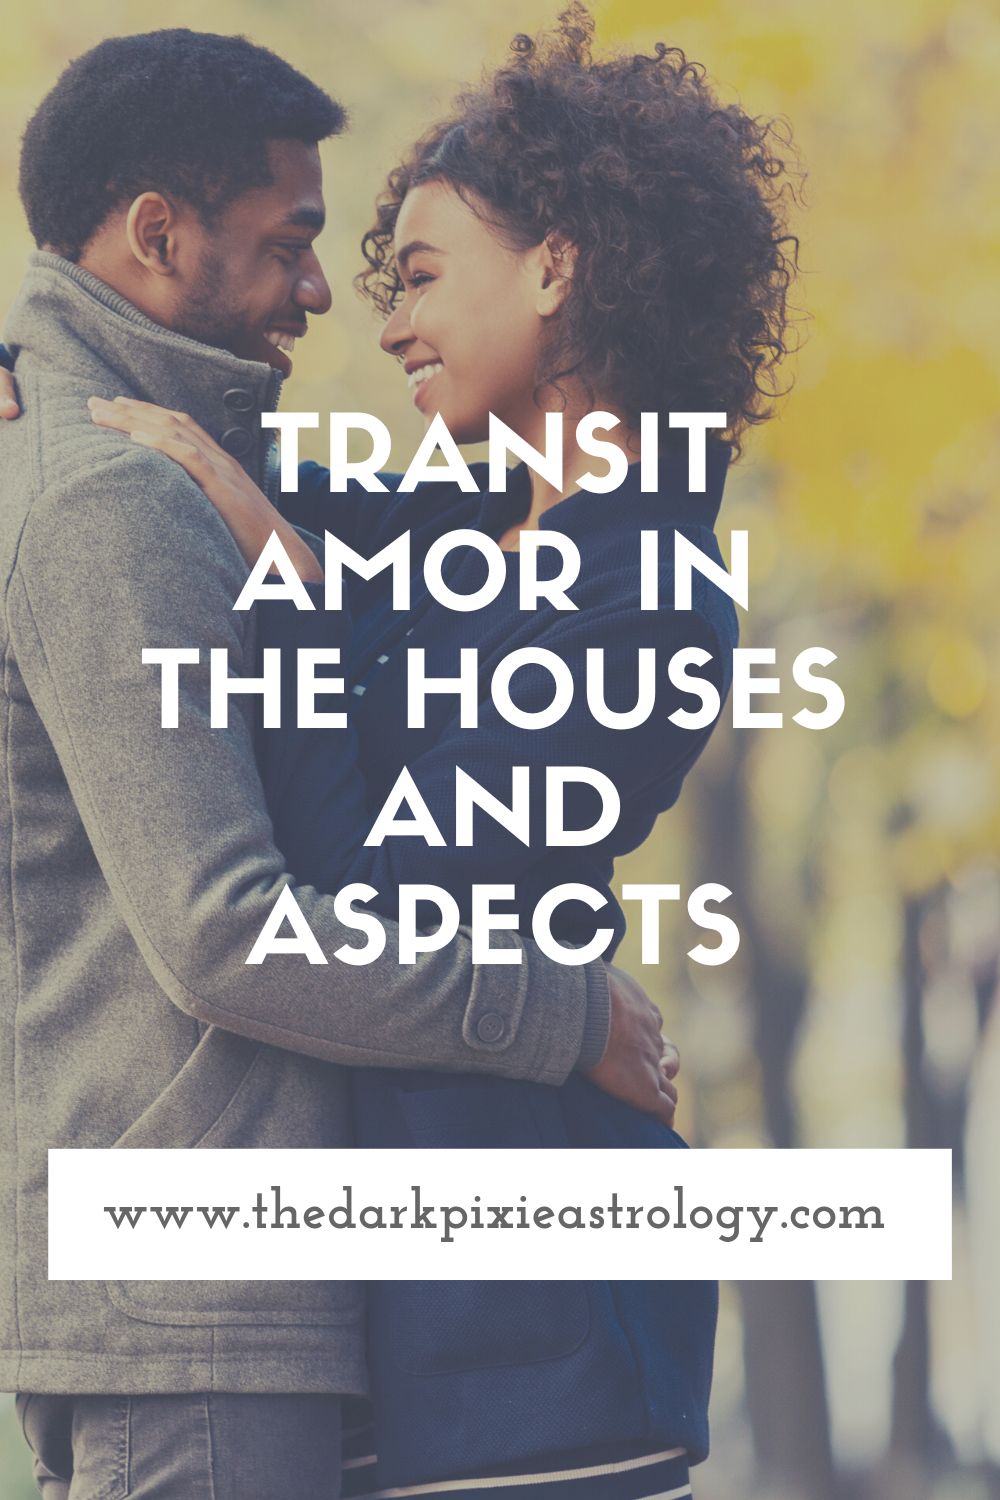 Transit Amor in the Houses and Aspect - The Dark Pixie Astrology